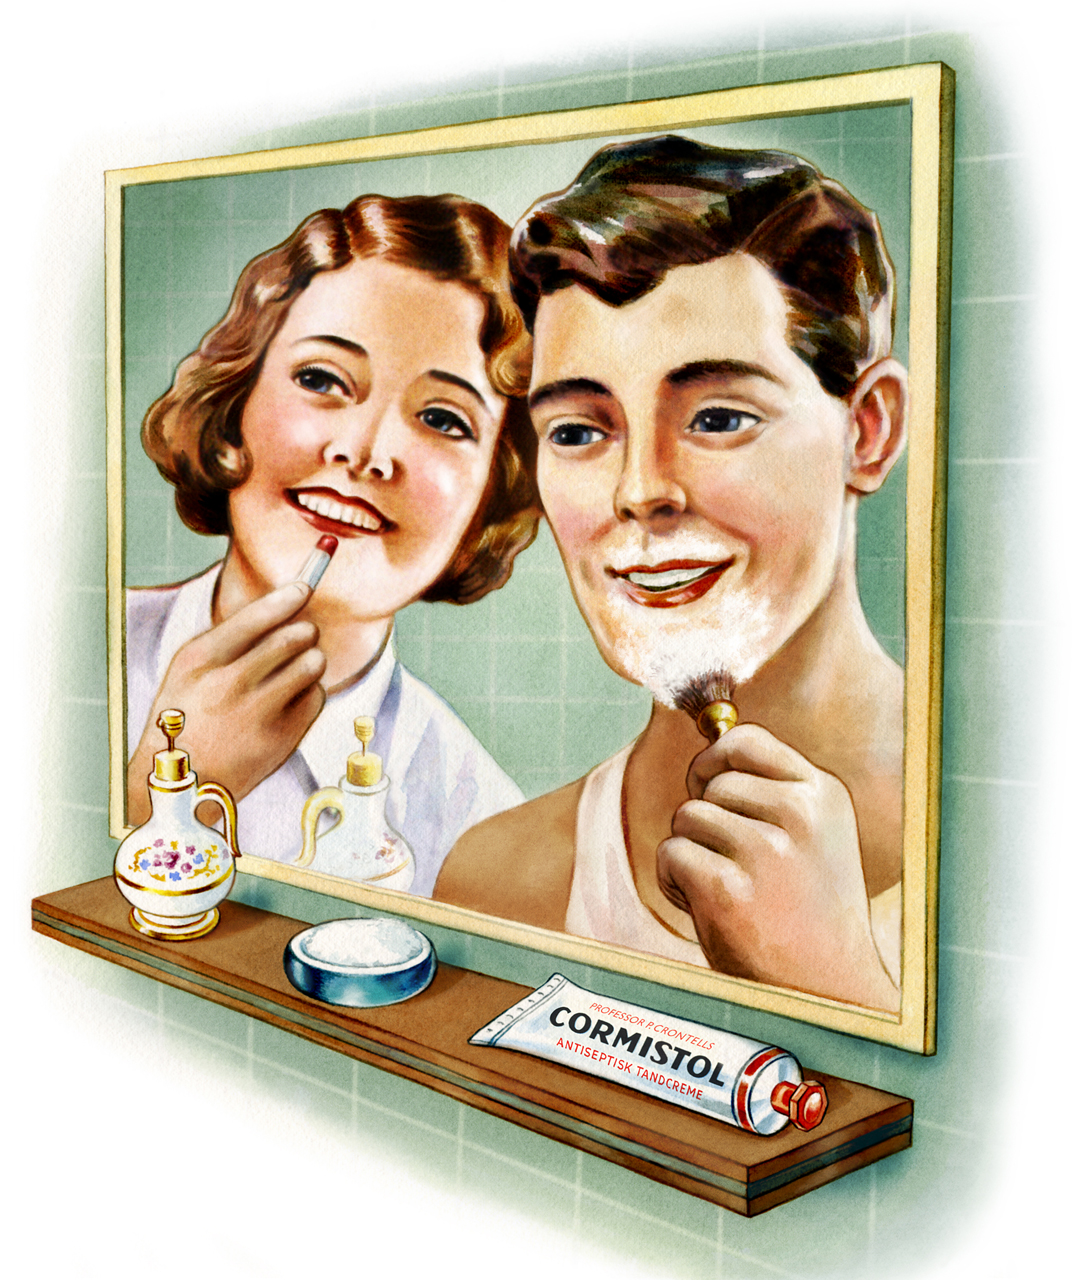 Illustration for an advertice campaign bathroom